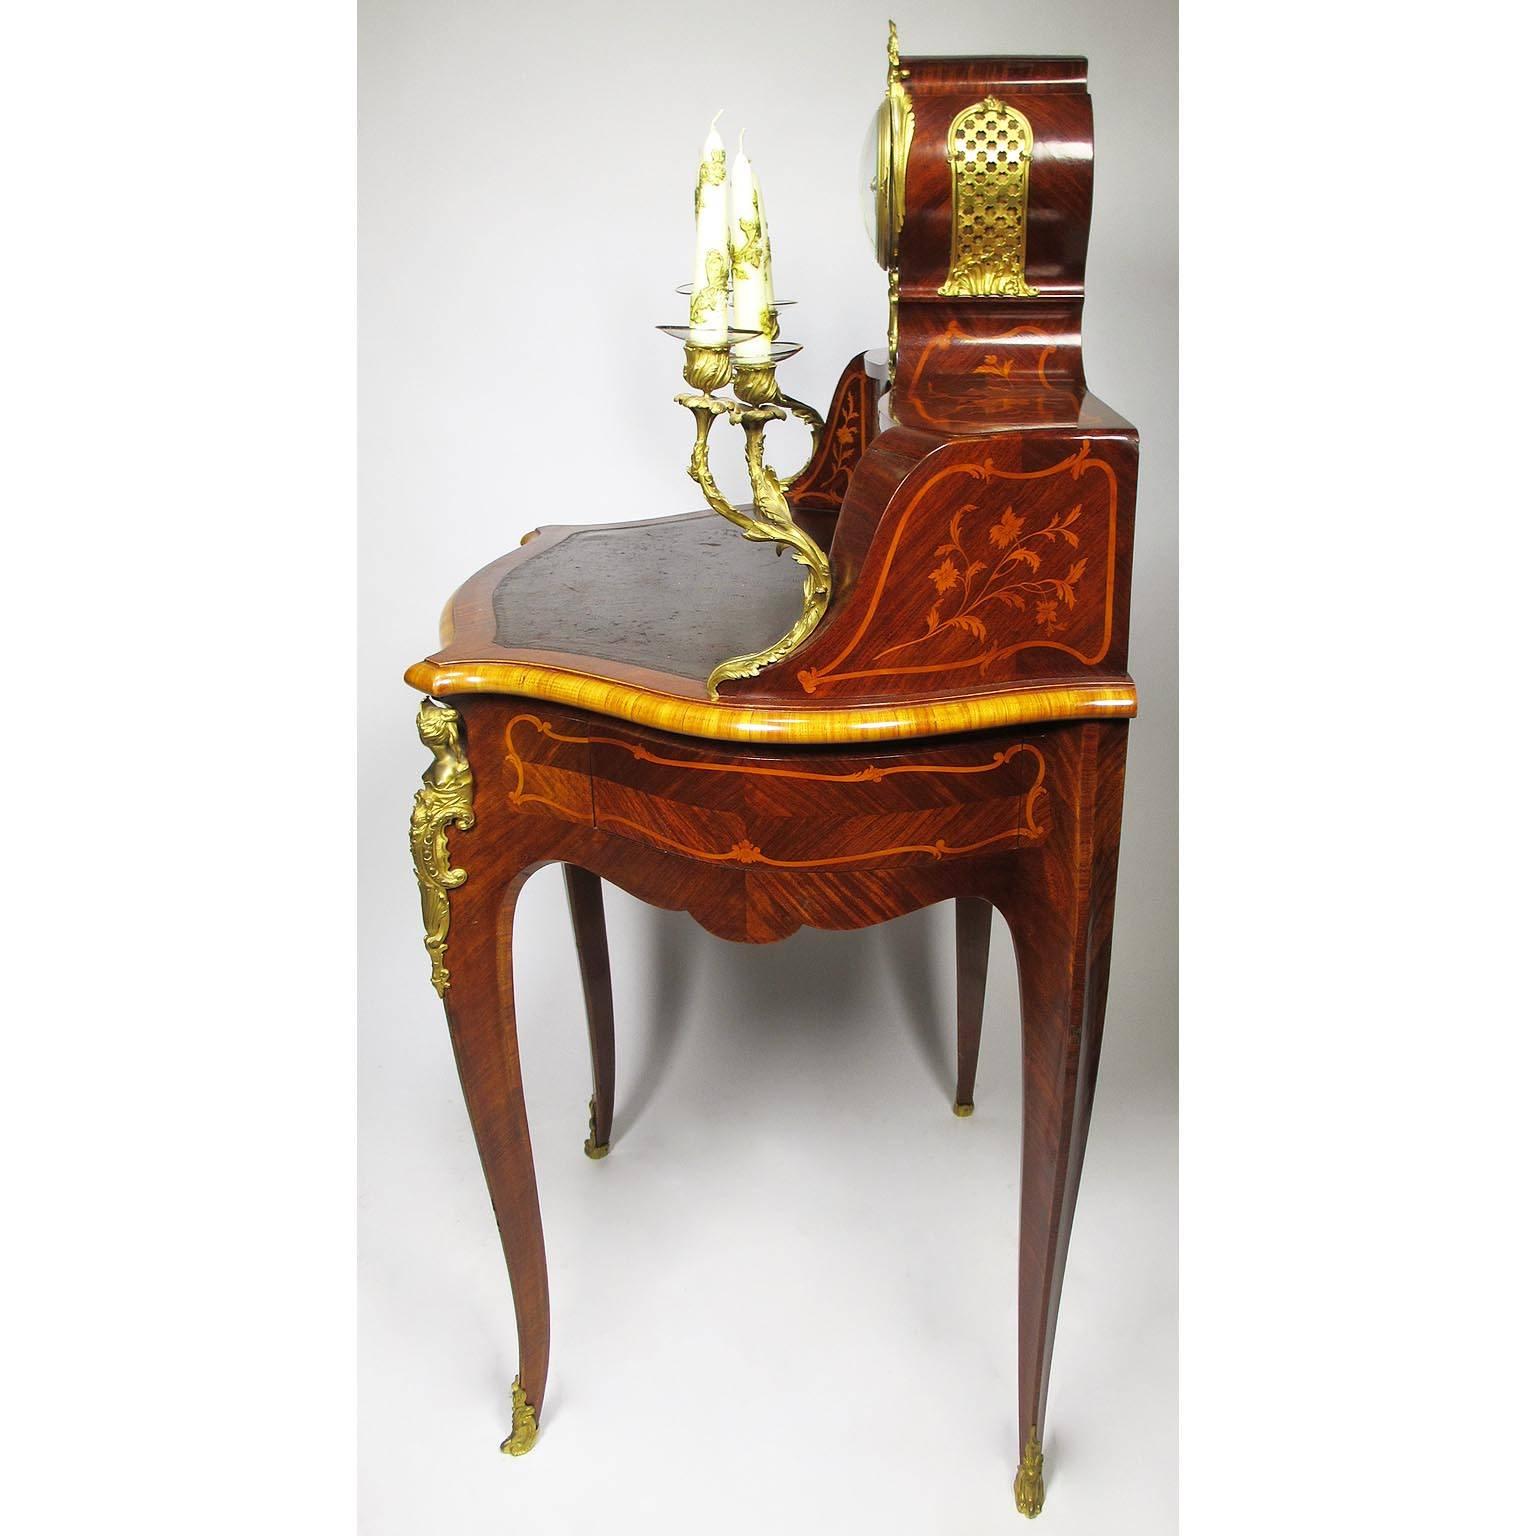 Early 20th Century French Louis XV Style Marquetry & Gilt Bronze-Mounted Secretary Desk with Clock For Sale